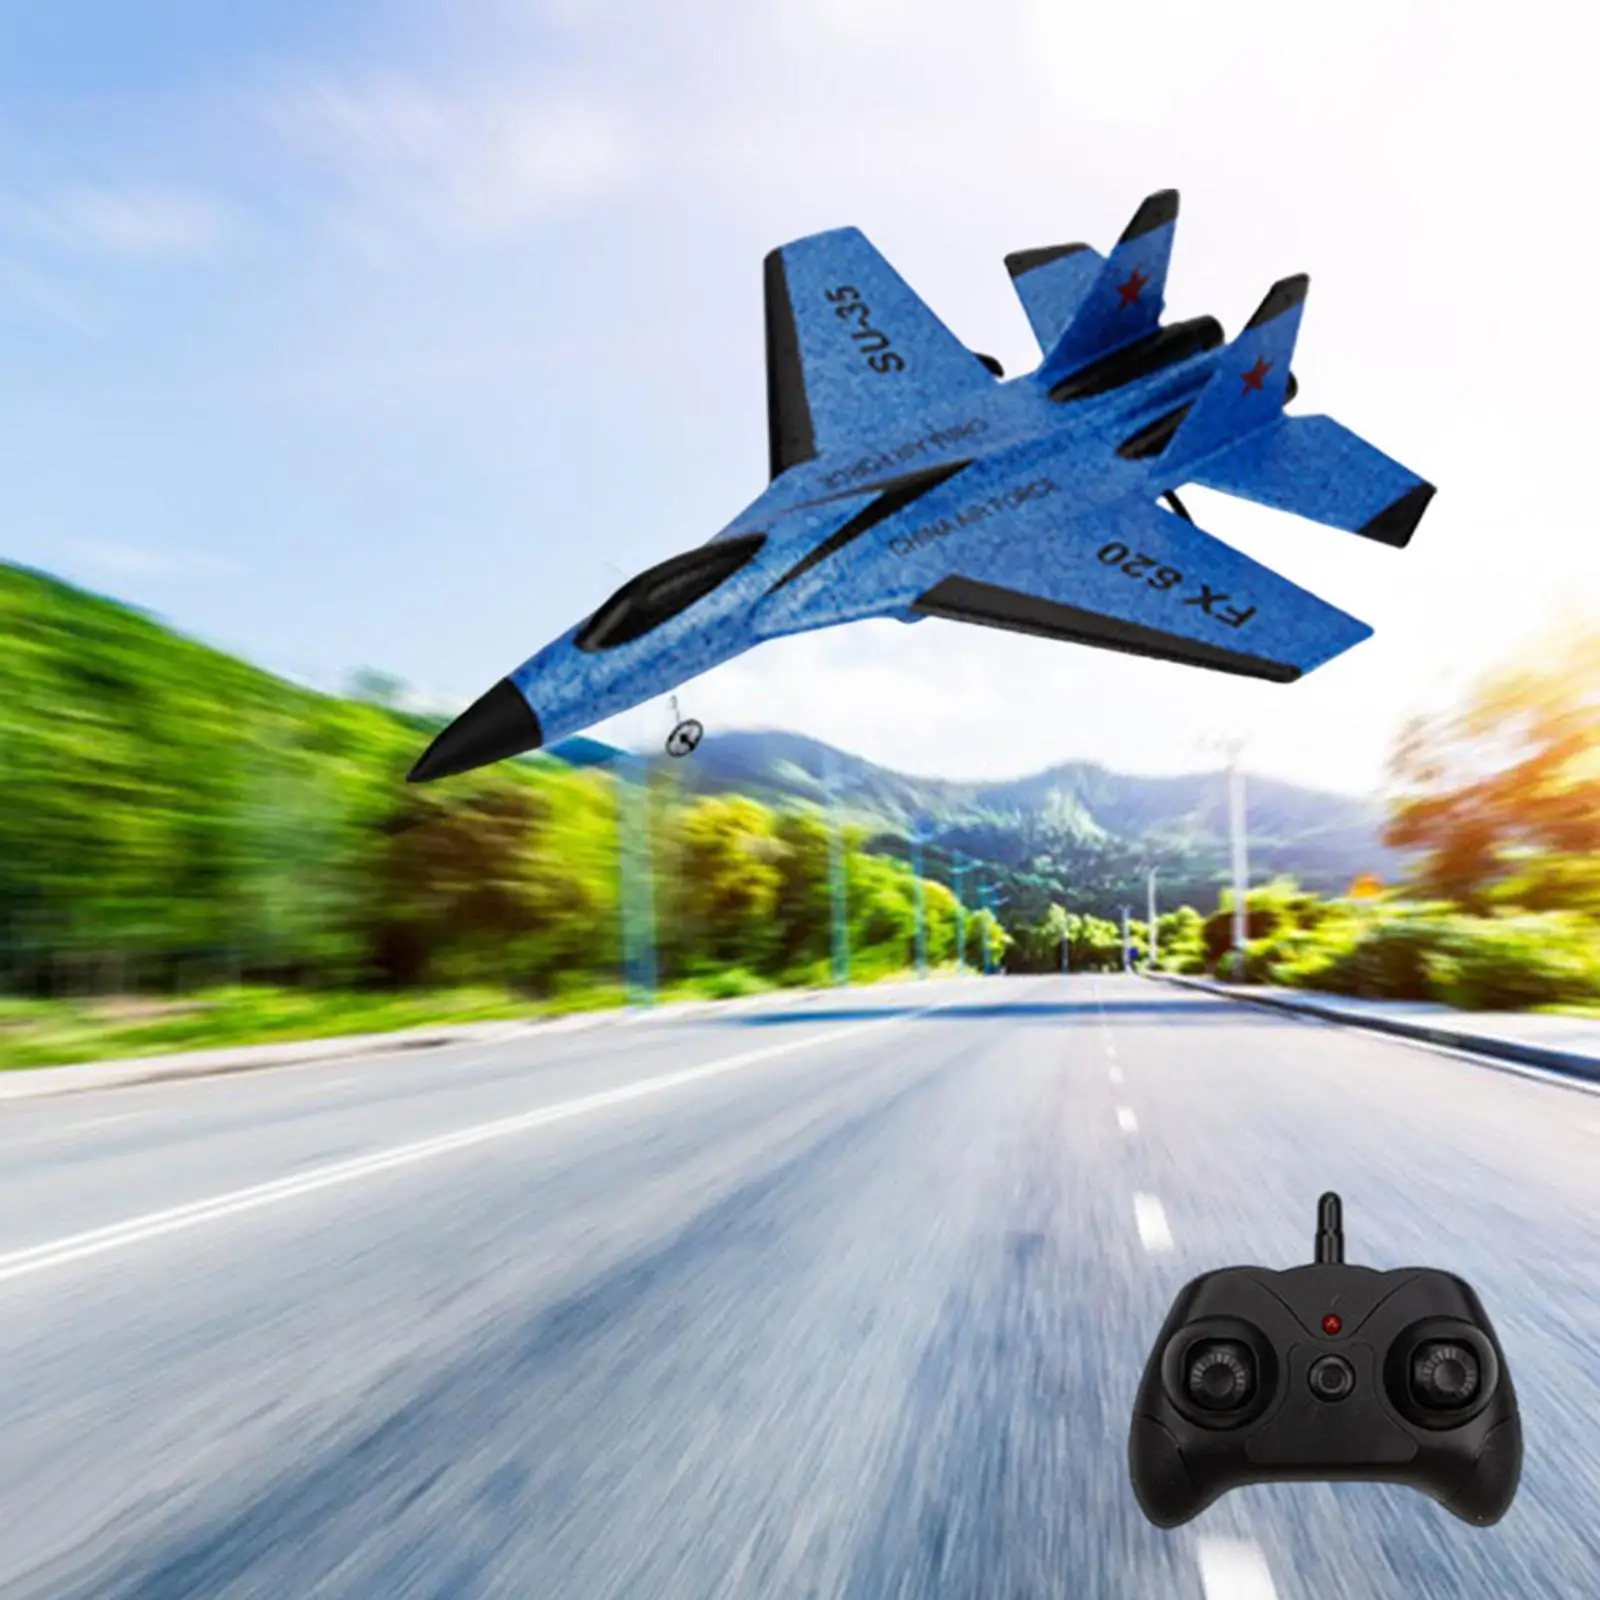 2.4G Remote Control Airplane Lightweight Outdoor Toy RC Plane for Adults